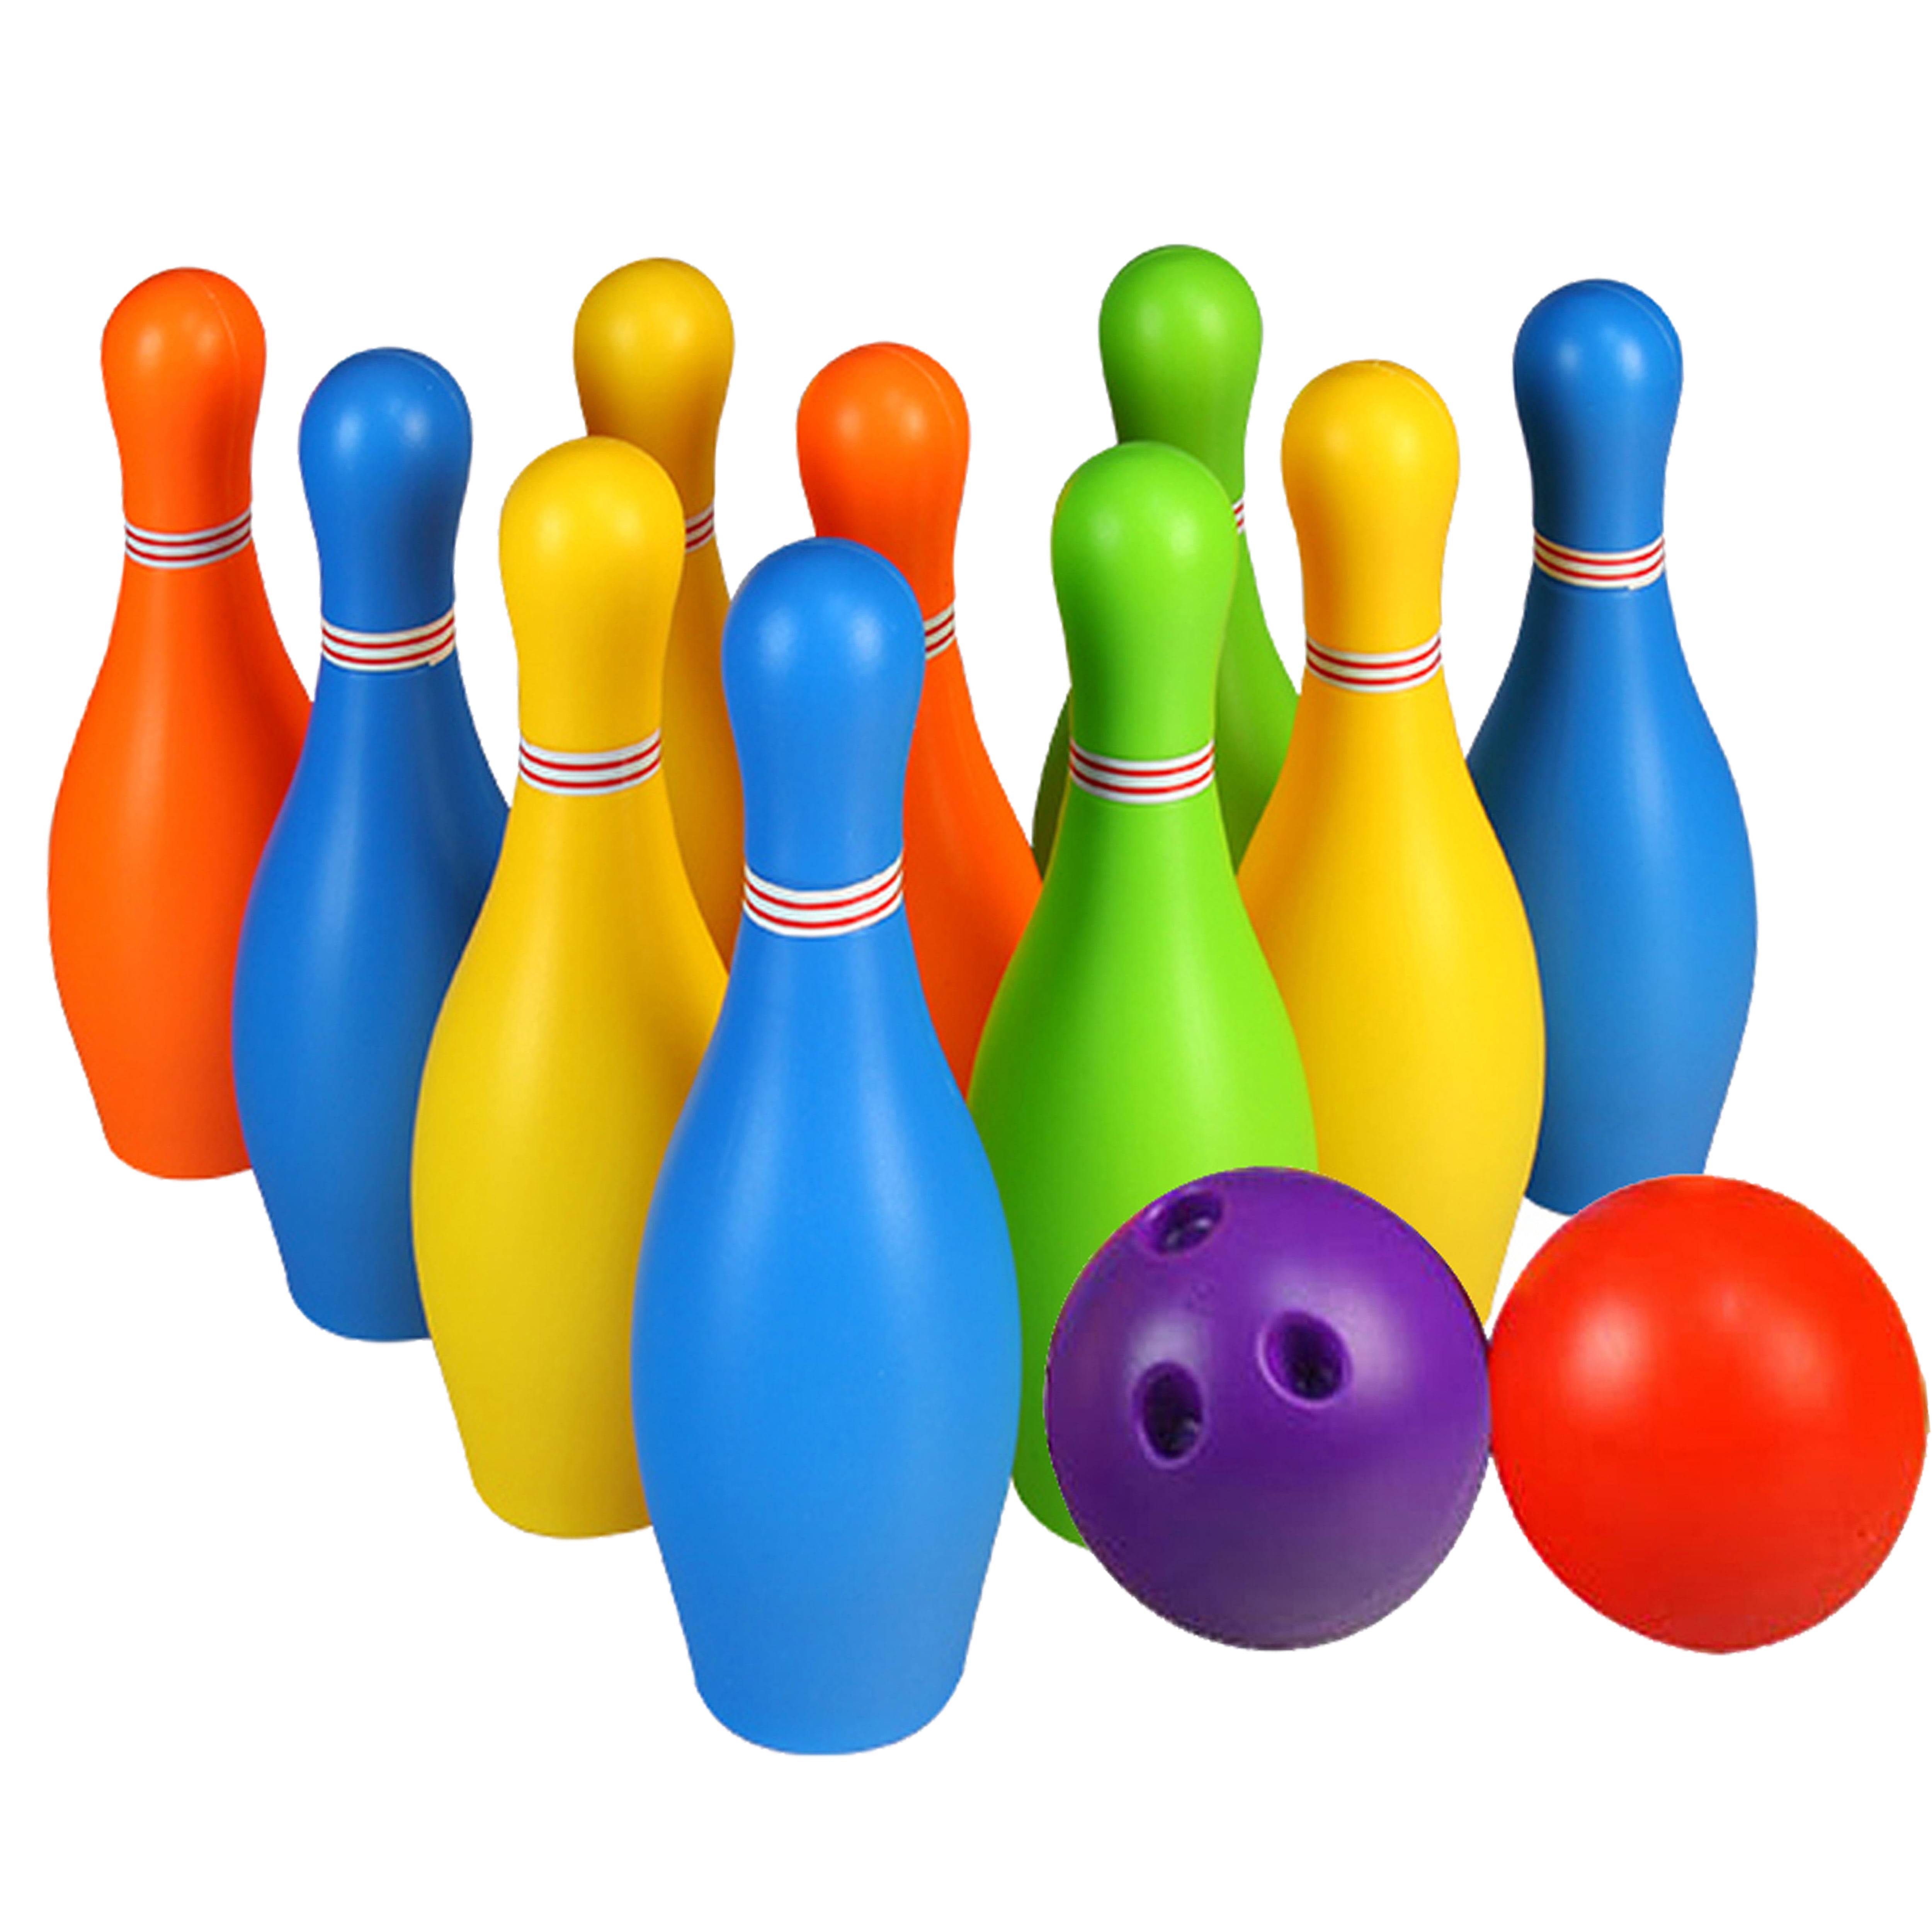 Child Bowling Play Set Gift Toys for 2,3,4,5 Year Old Boys Girls Birthday Gift 